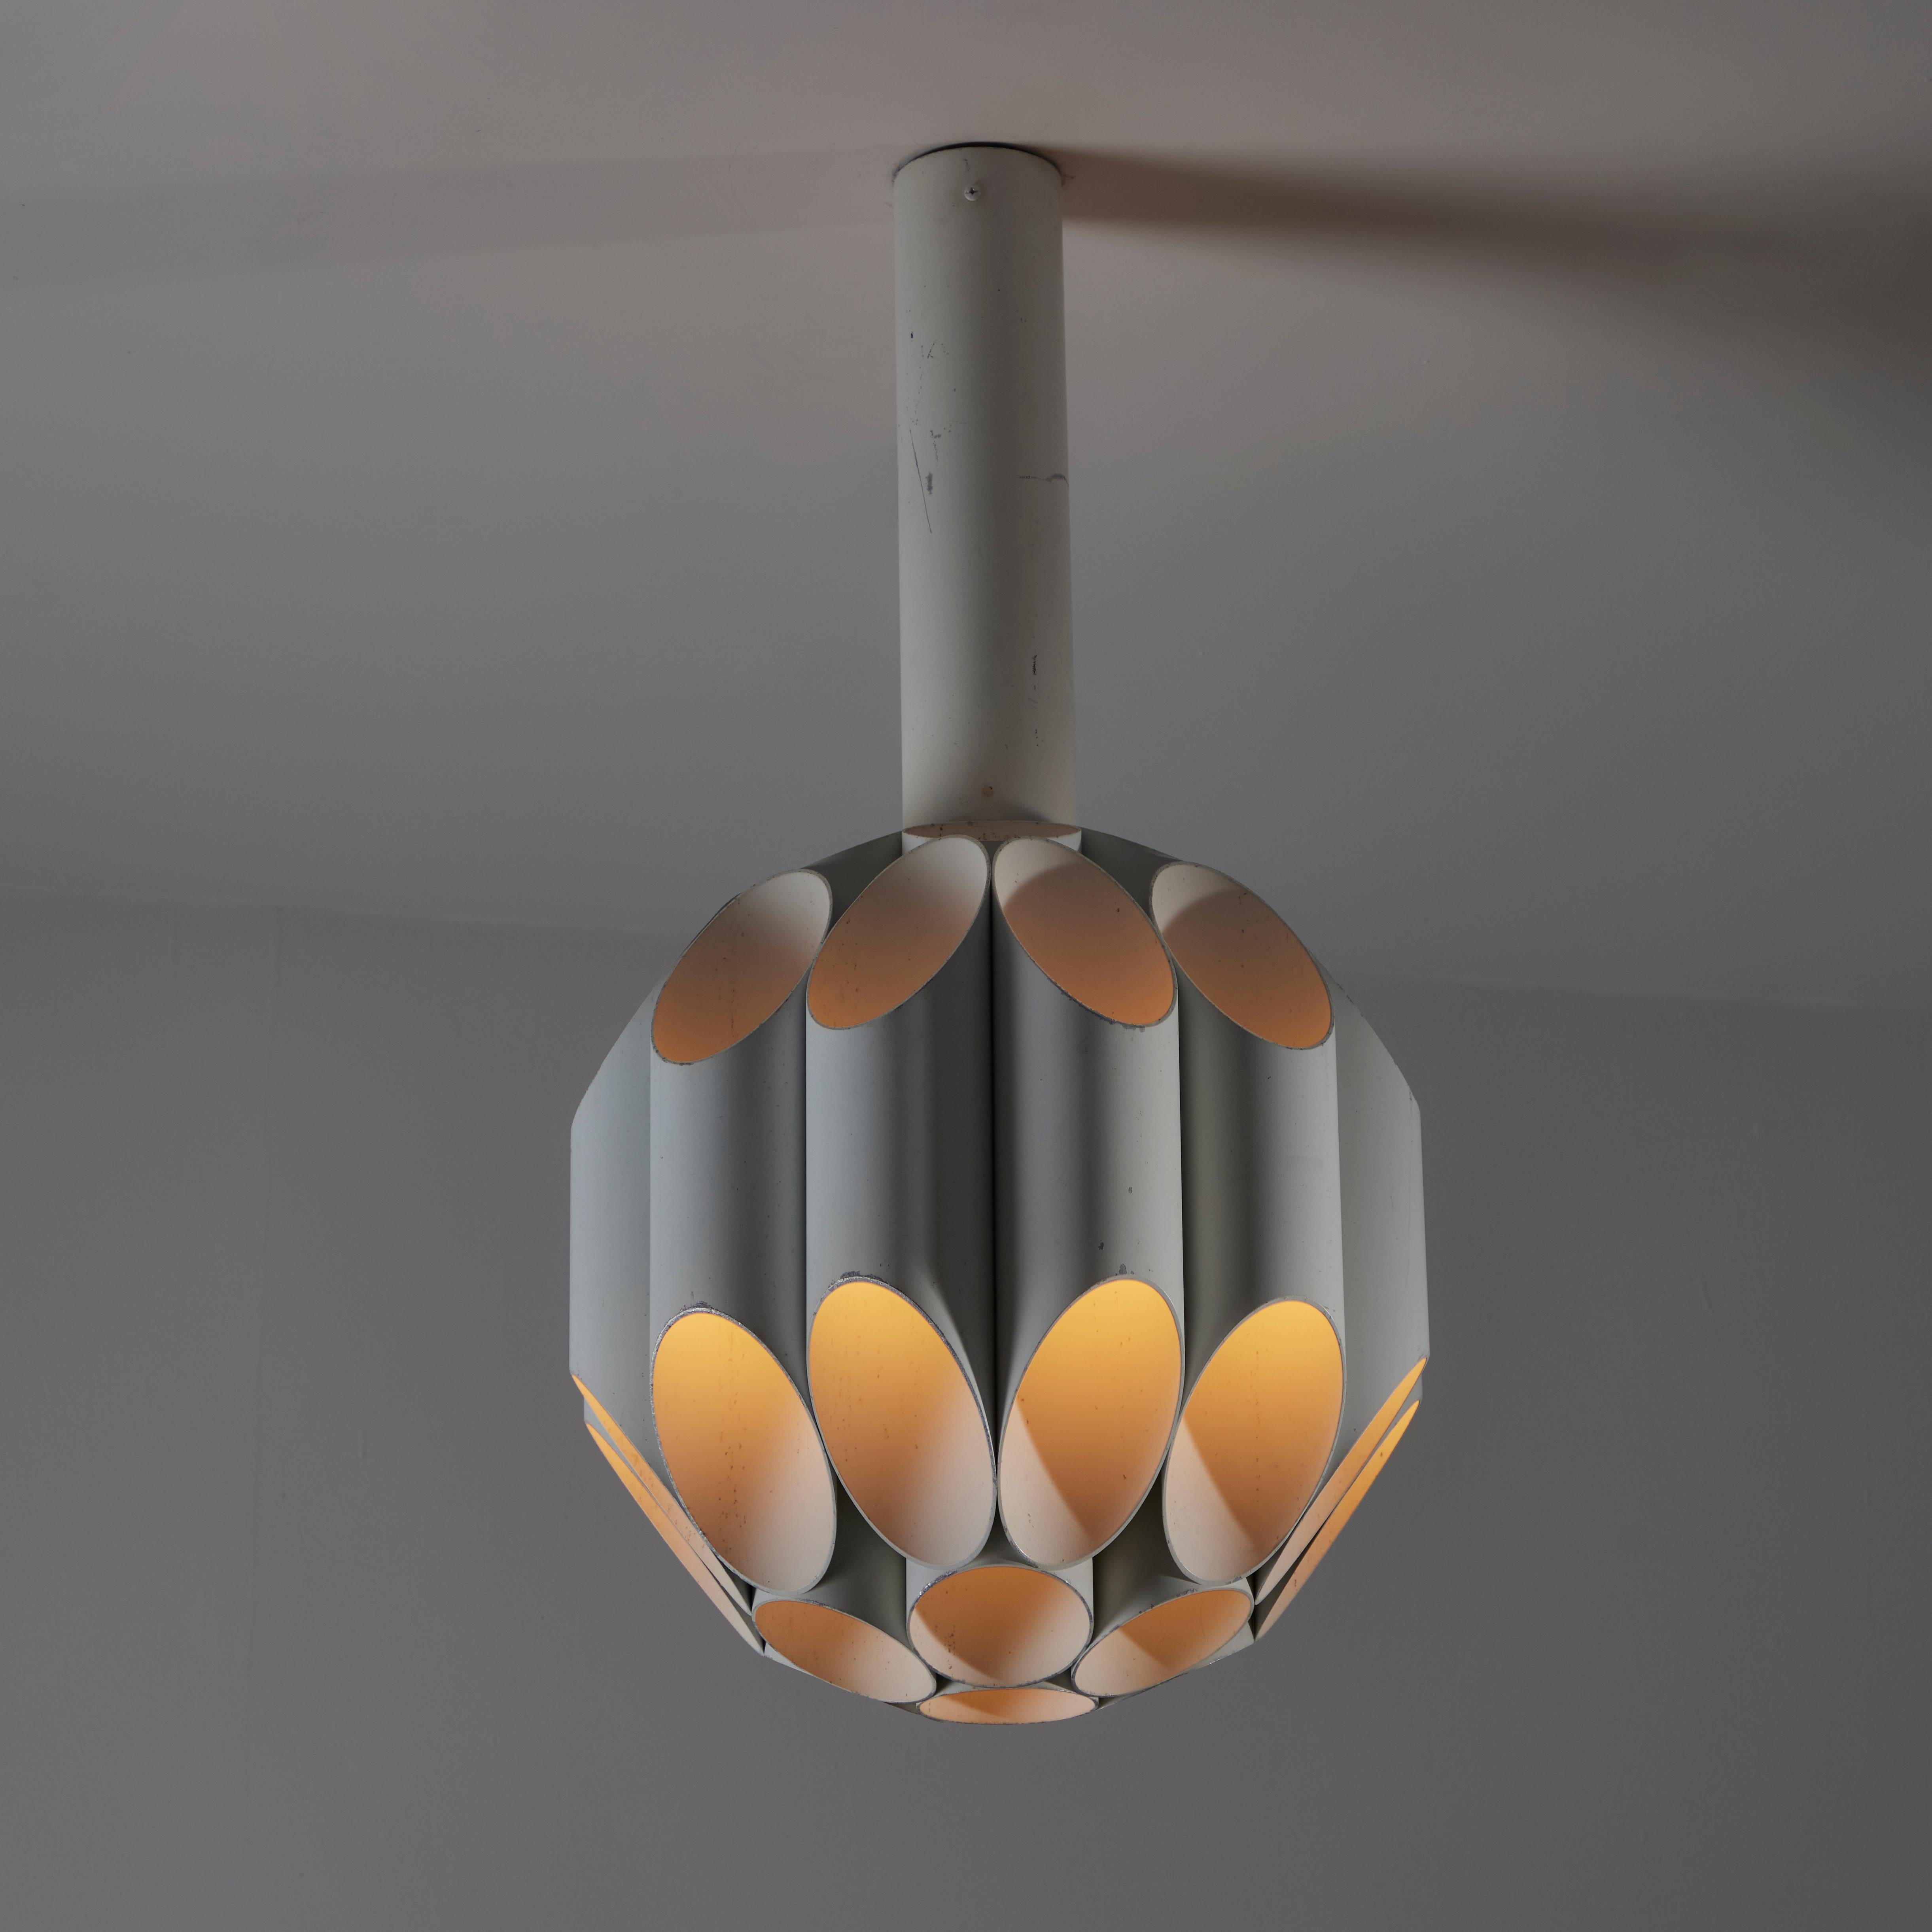 Single 'Carciofo' ceiling light by Gianni Celada for Fontana Arte. Designed and manufactured in Italy, circa the 1970s. Enameled metal pipe flutes make there way around to form what resembles a honeycomb body. Each flute holds a single E14 socket